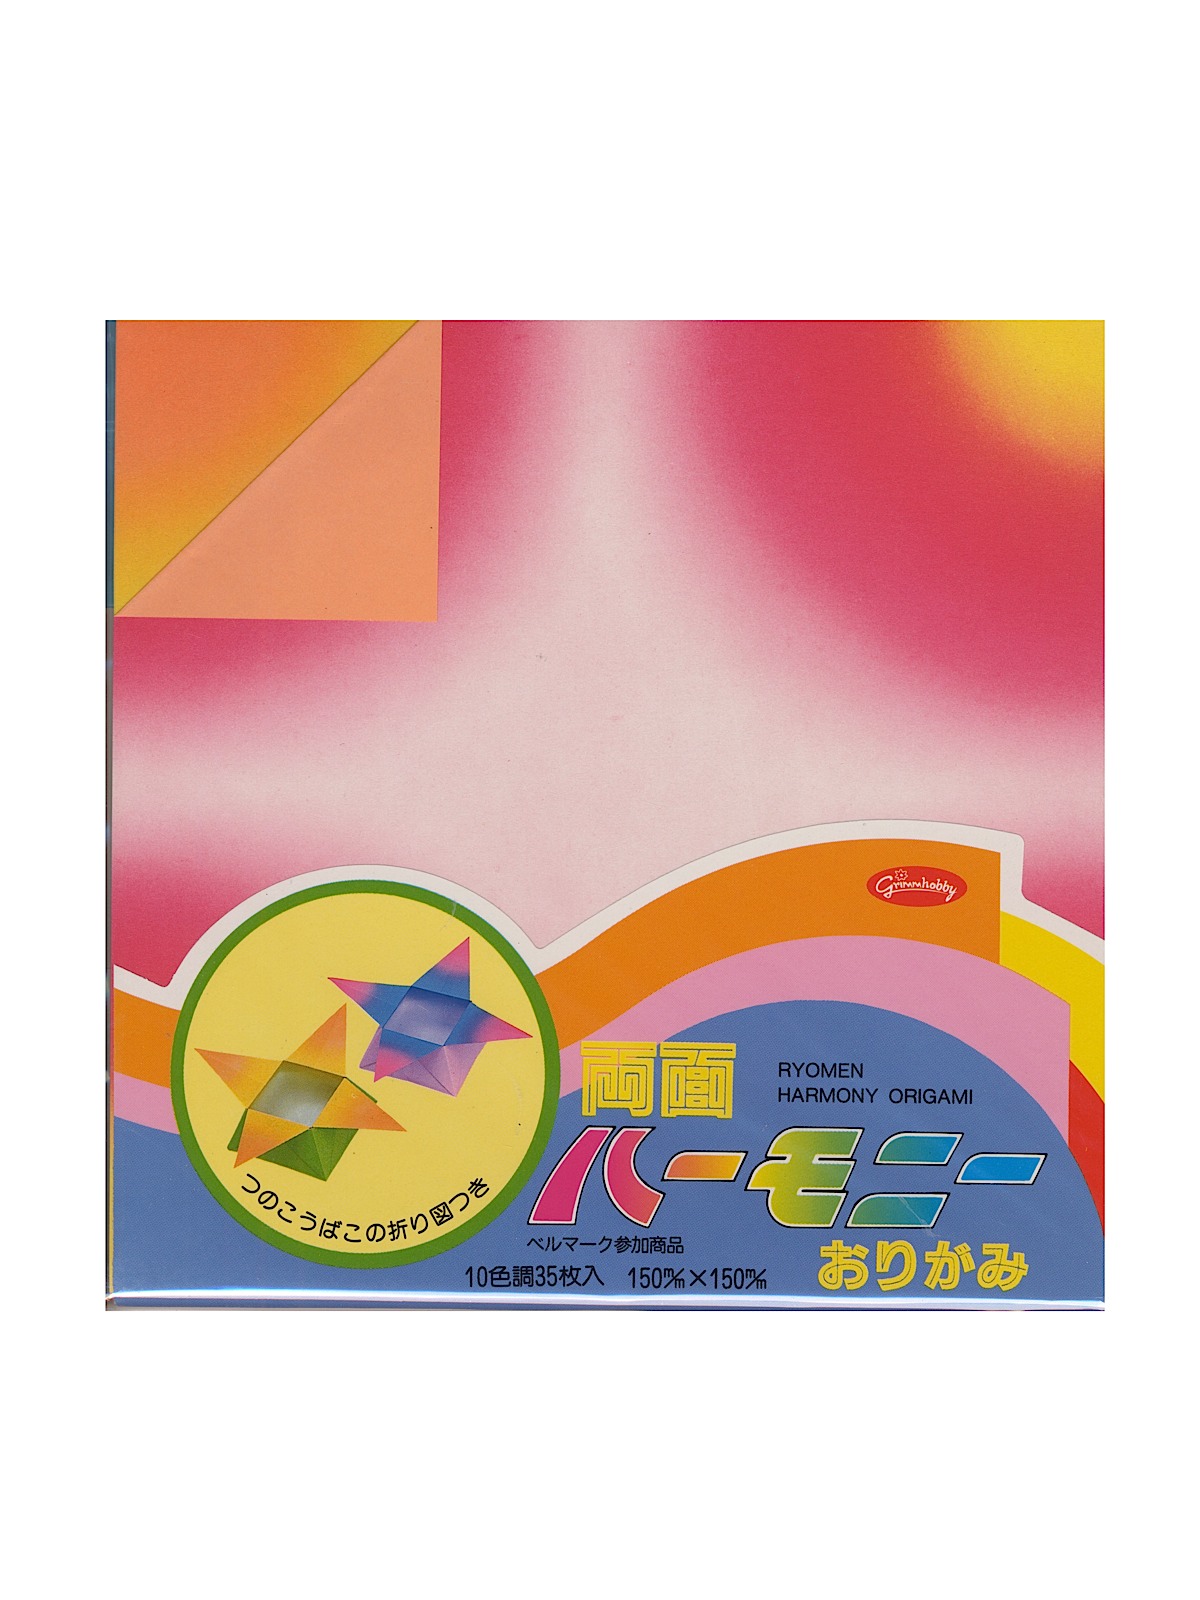 Origami Paper 5 7 8 In. X 5 7 8 In. Double Sided Harmony 35 Sheets